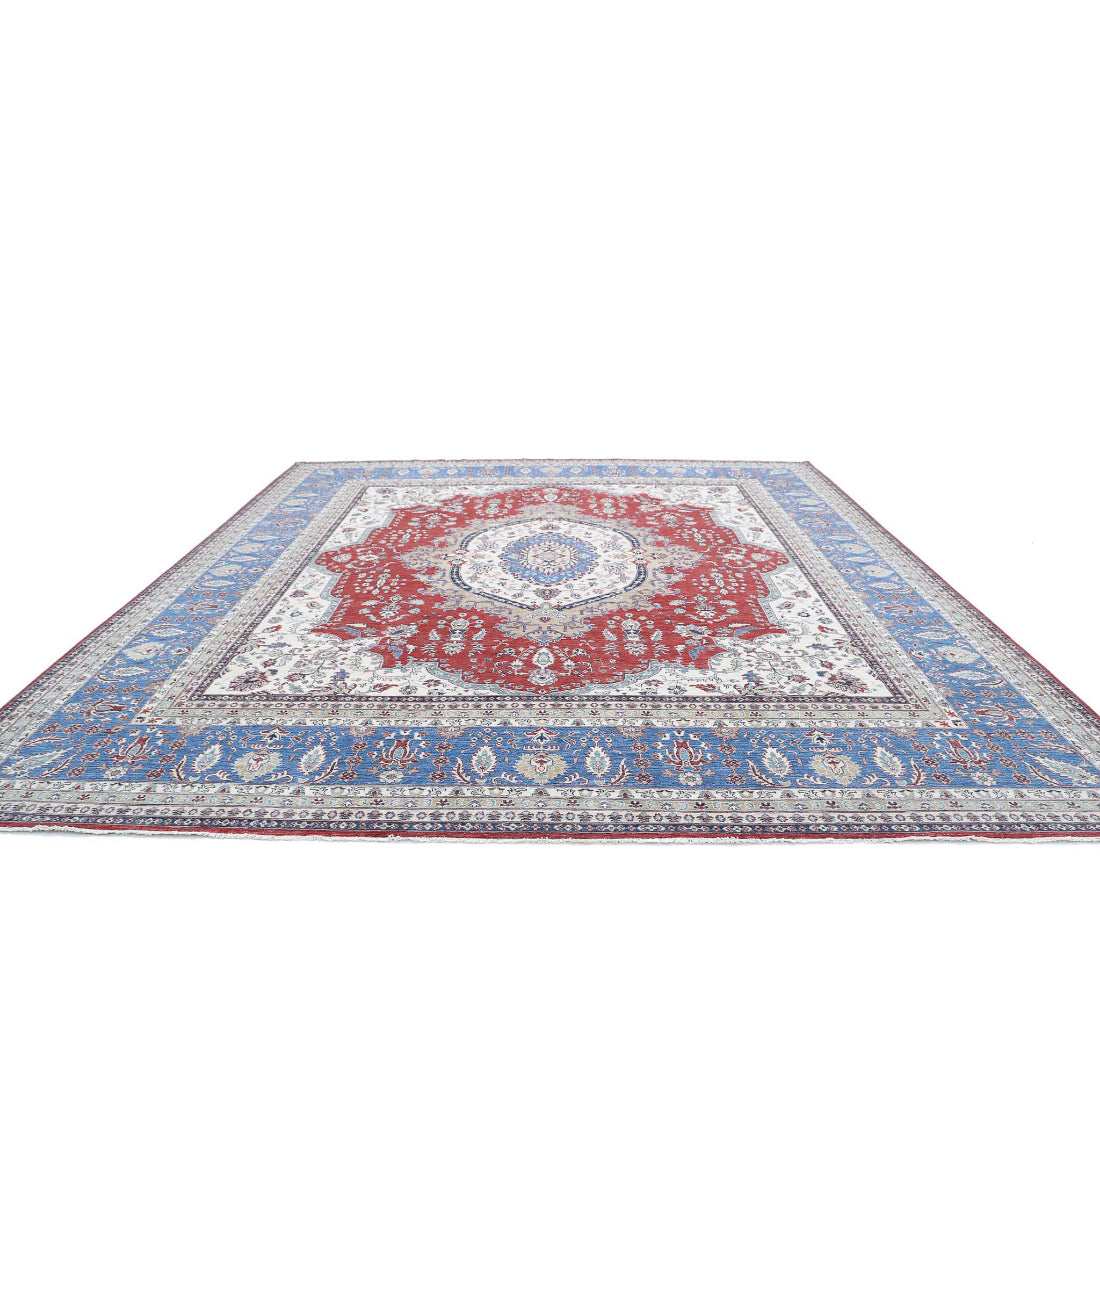 Heriz 14'0'' X 15'7'' Hand-Knotted Wool Rug 14'0'' x 15'7'' (420 X 468) / Red / Blue